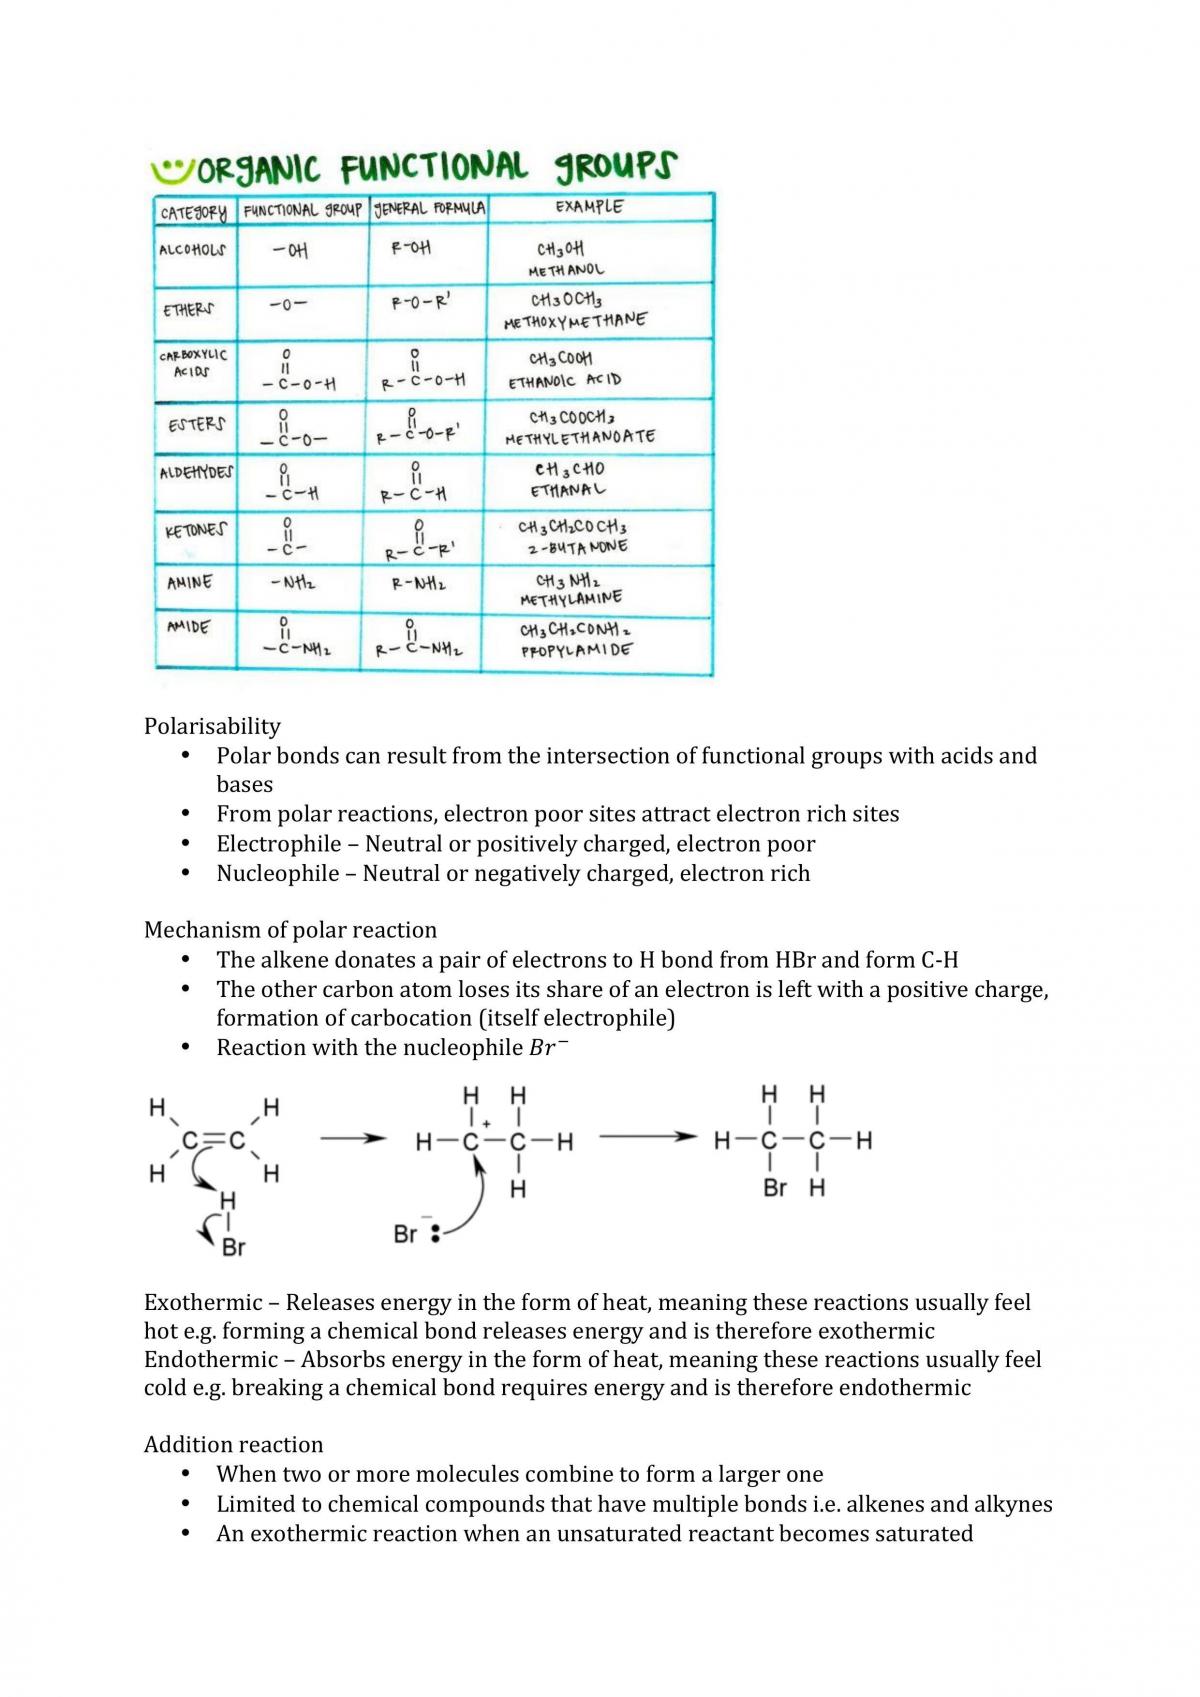 MATS1101 - Chemistry Notes - Page 17